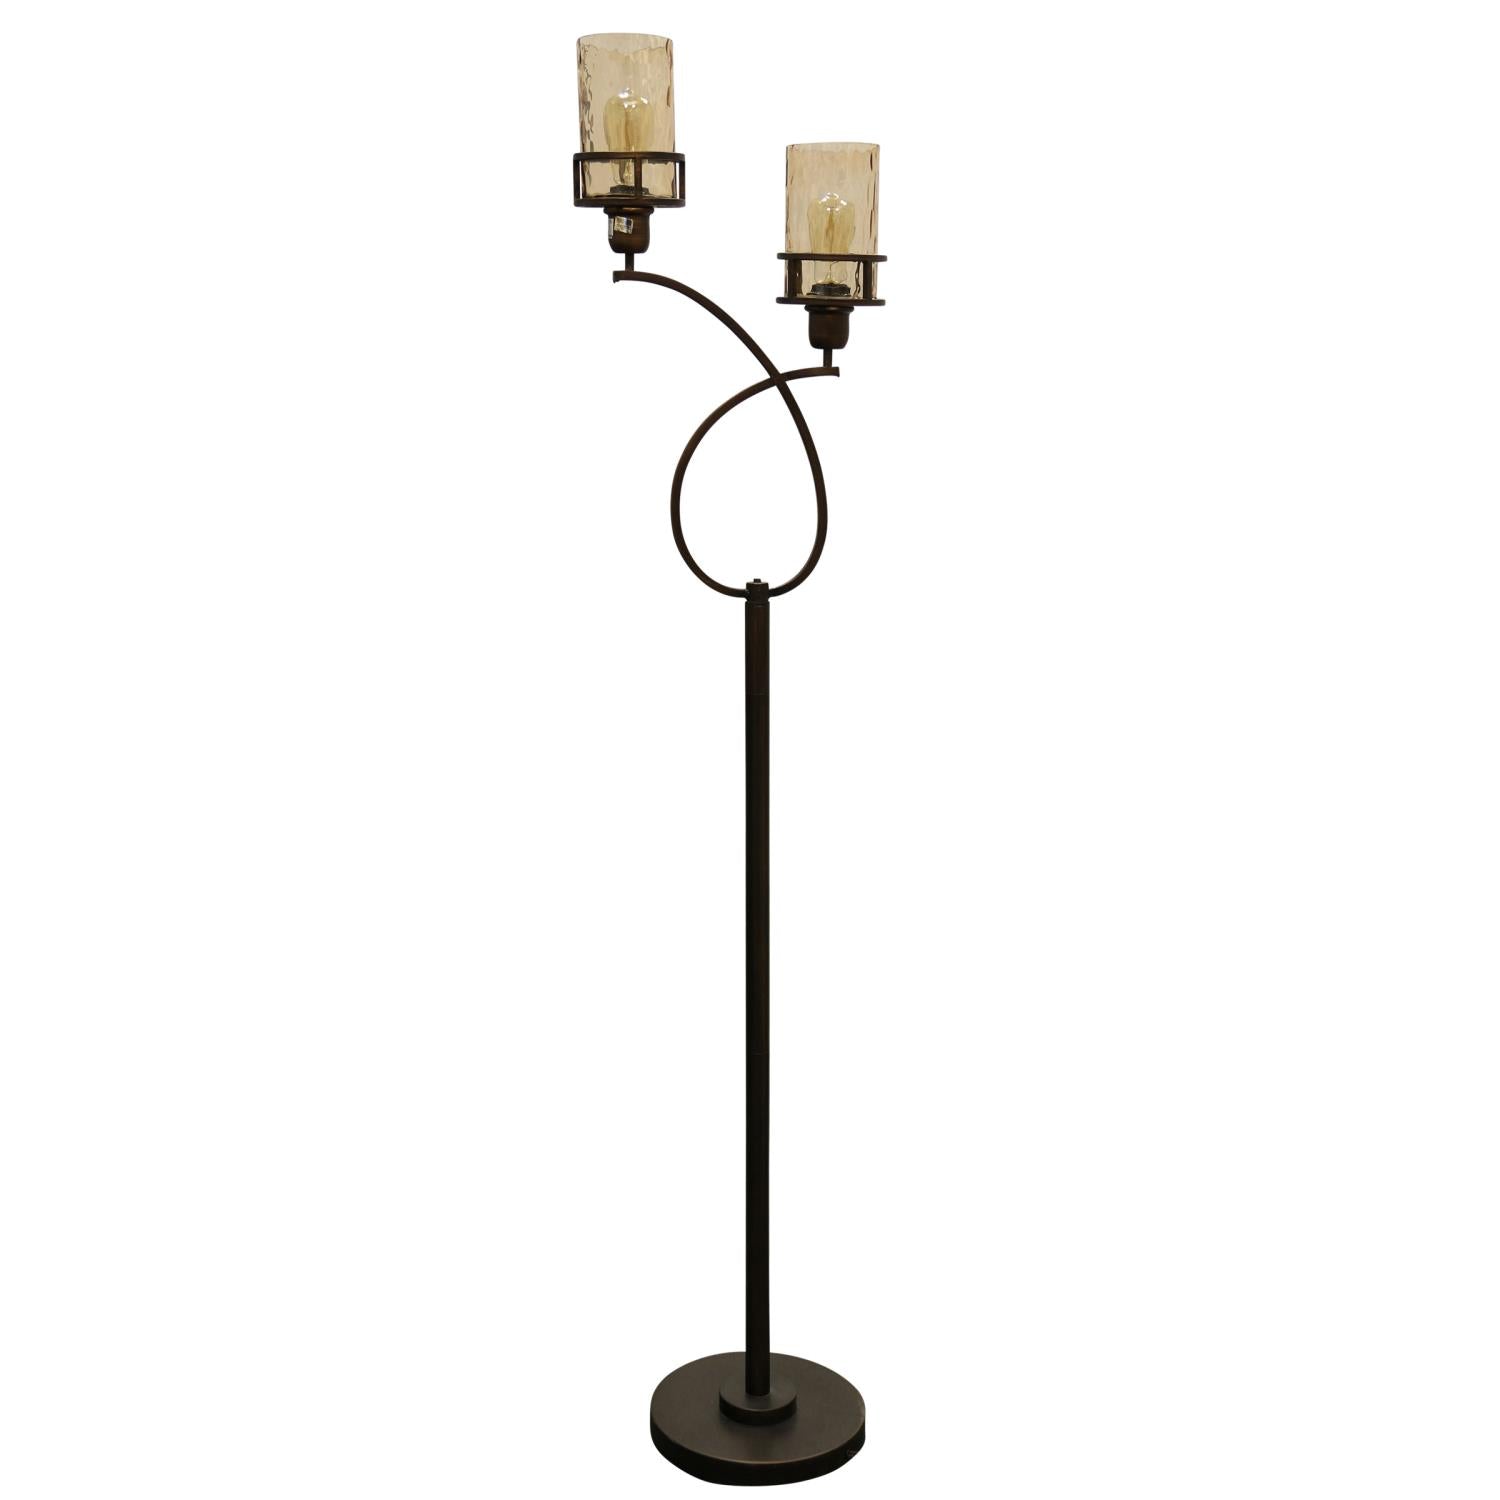 GwG Outlet 2 Headed Metal Floor Lamp with Glass in Bronze Finish